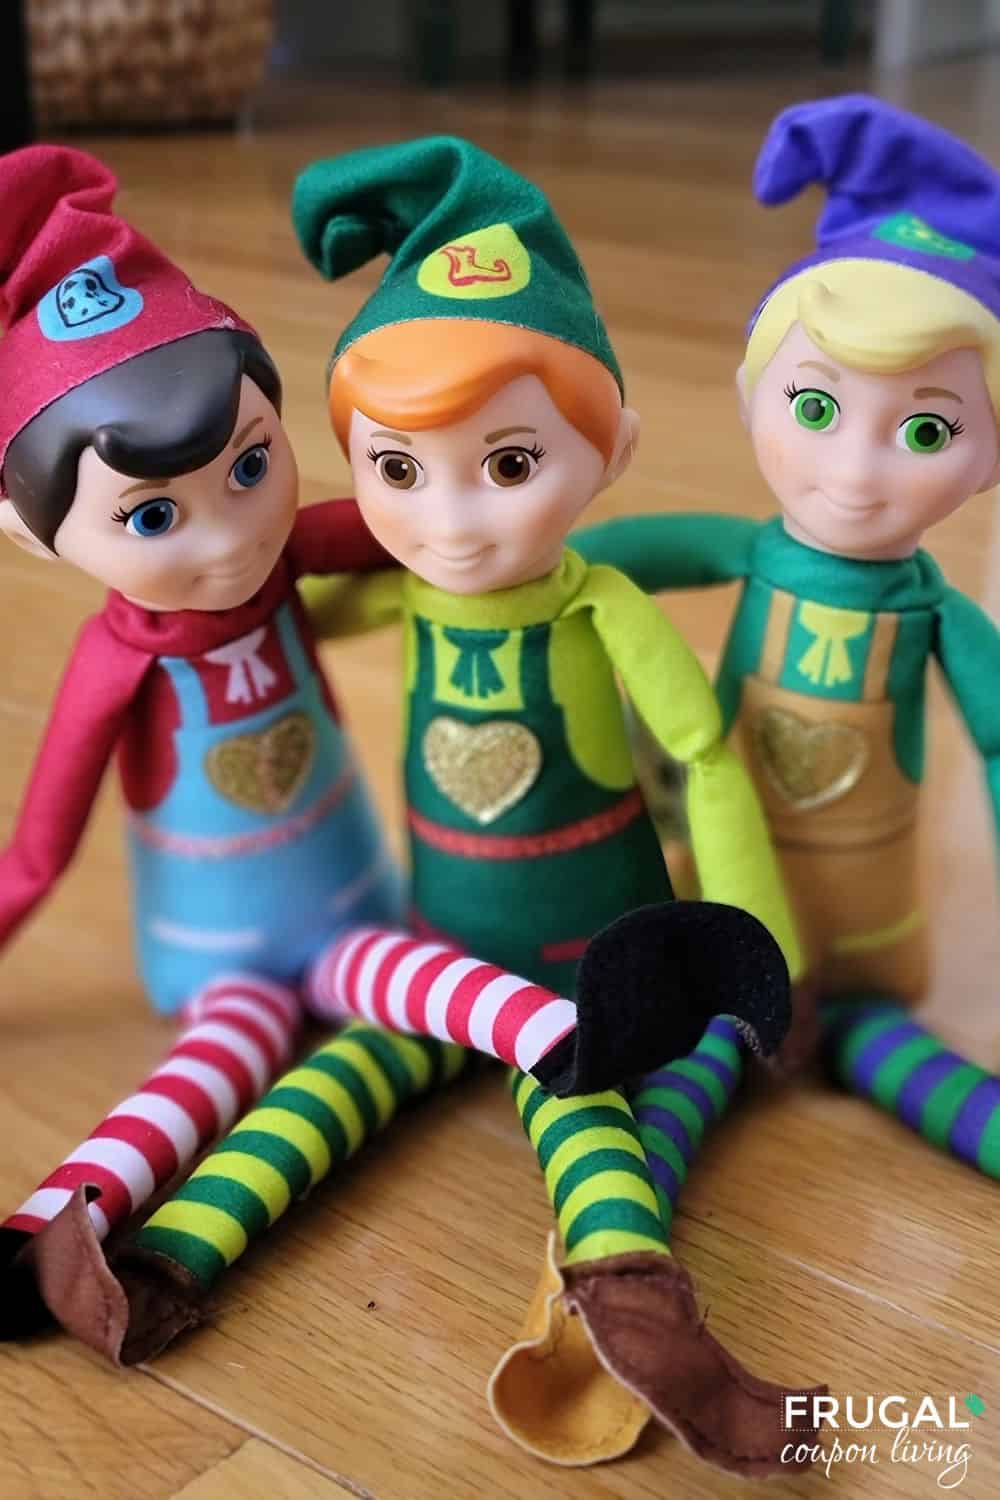 who are Elf Mates three dolls for christmas